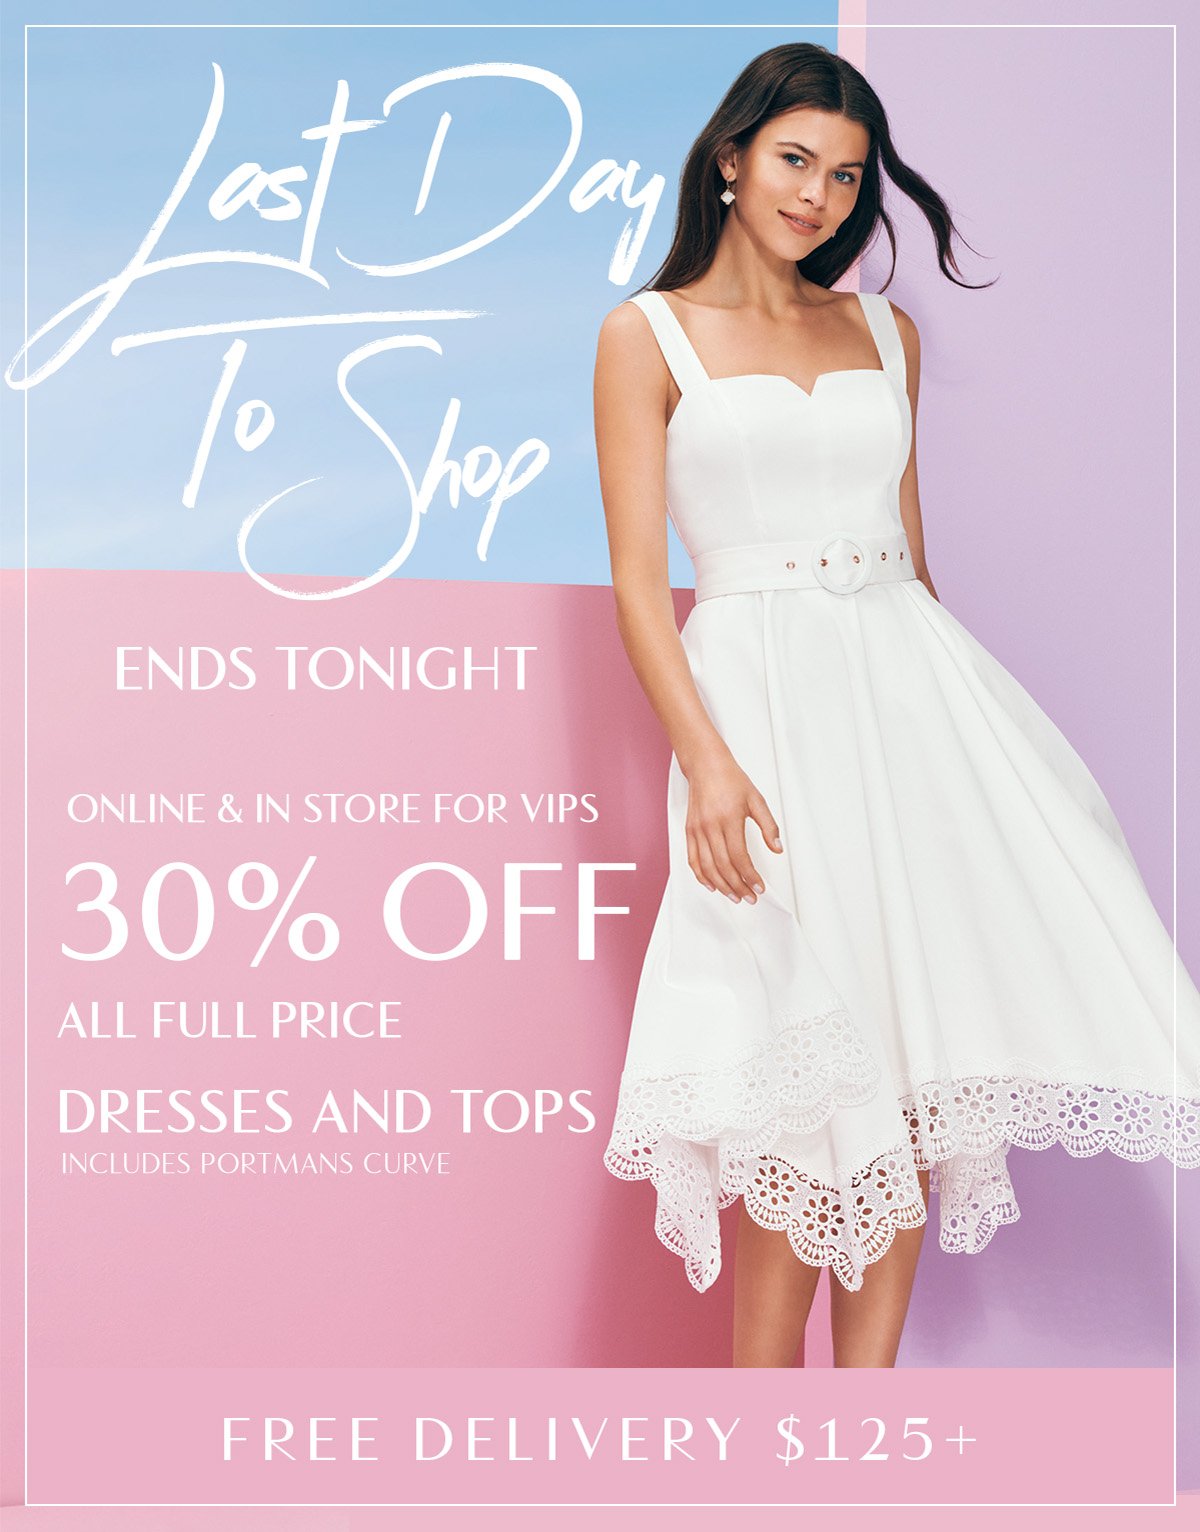 Get Summer Ready| Ends Tonight | 30% Off All Full Price Dresses and Tops including Portmans Curve + Free Delivery $125+